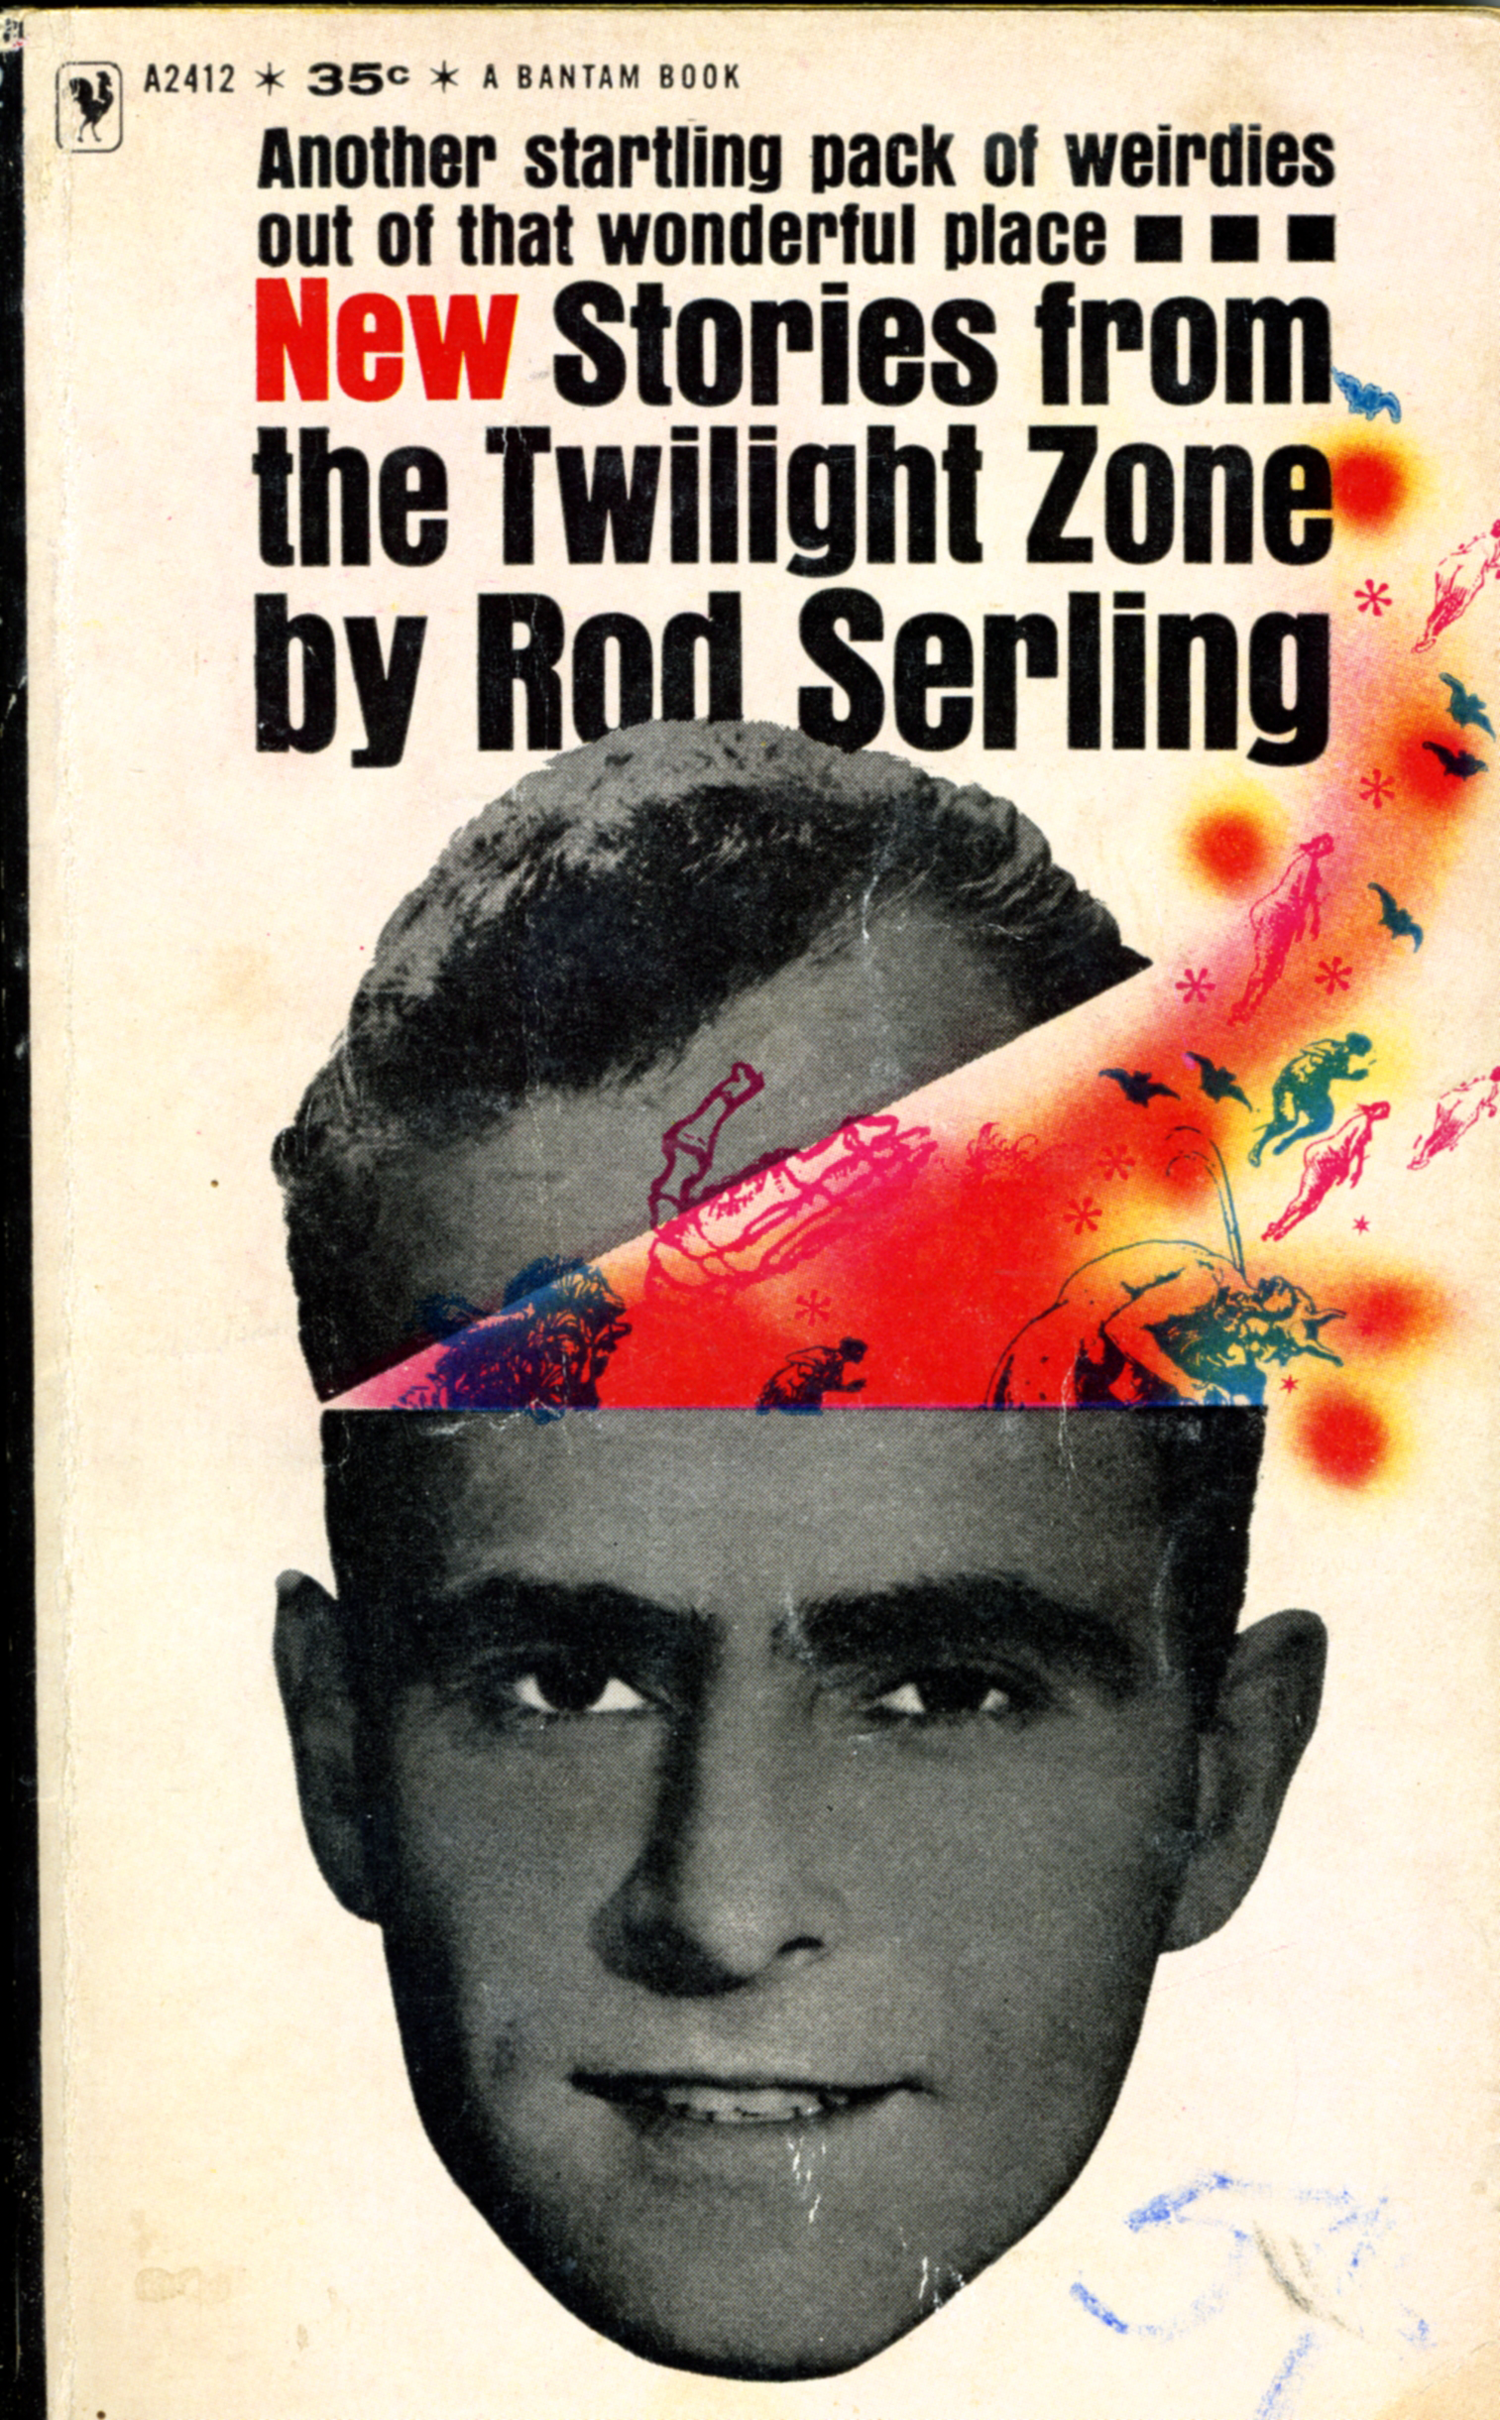 New Stories from the Twilight Zone